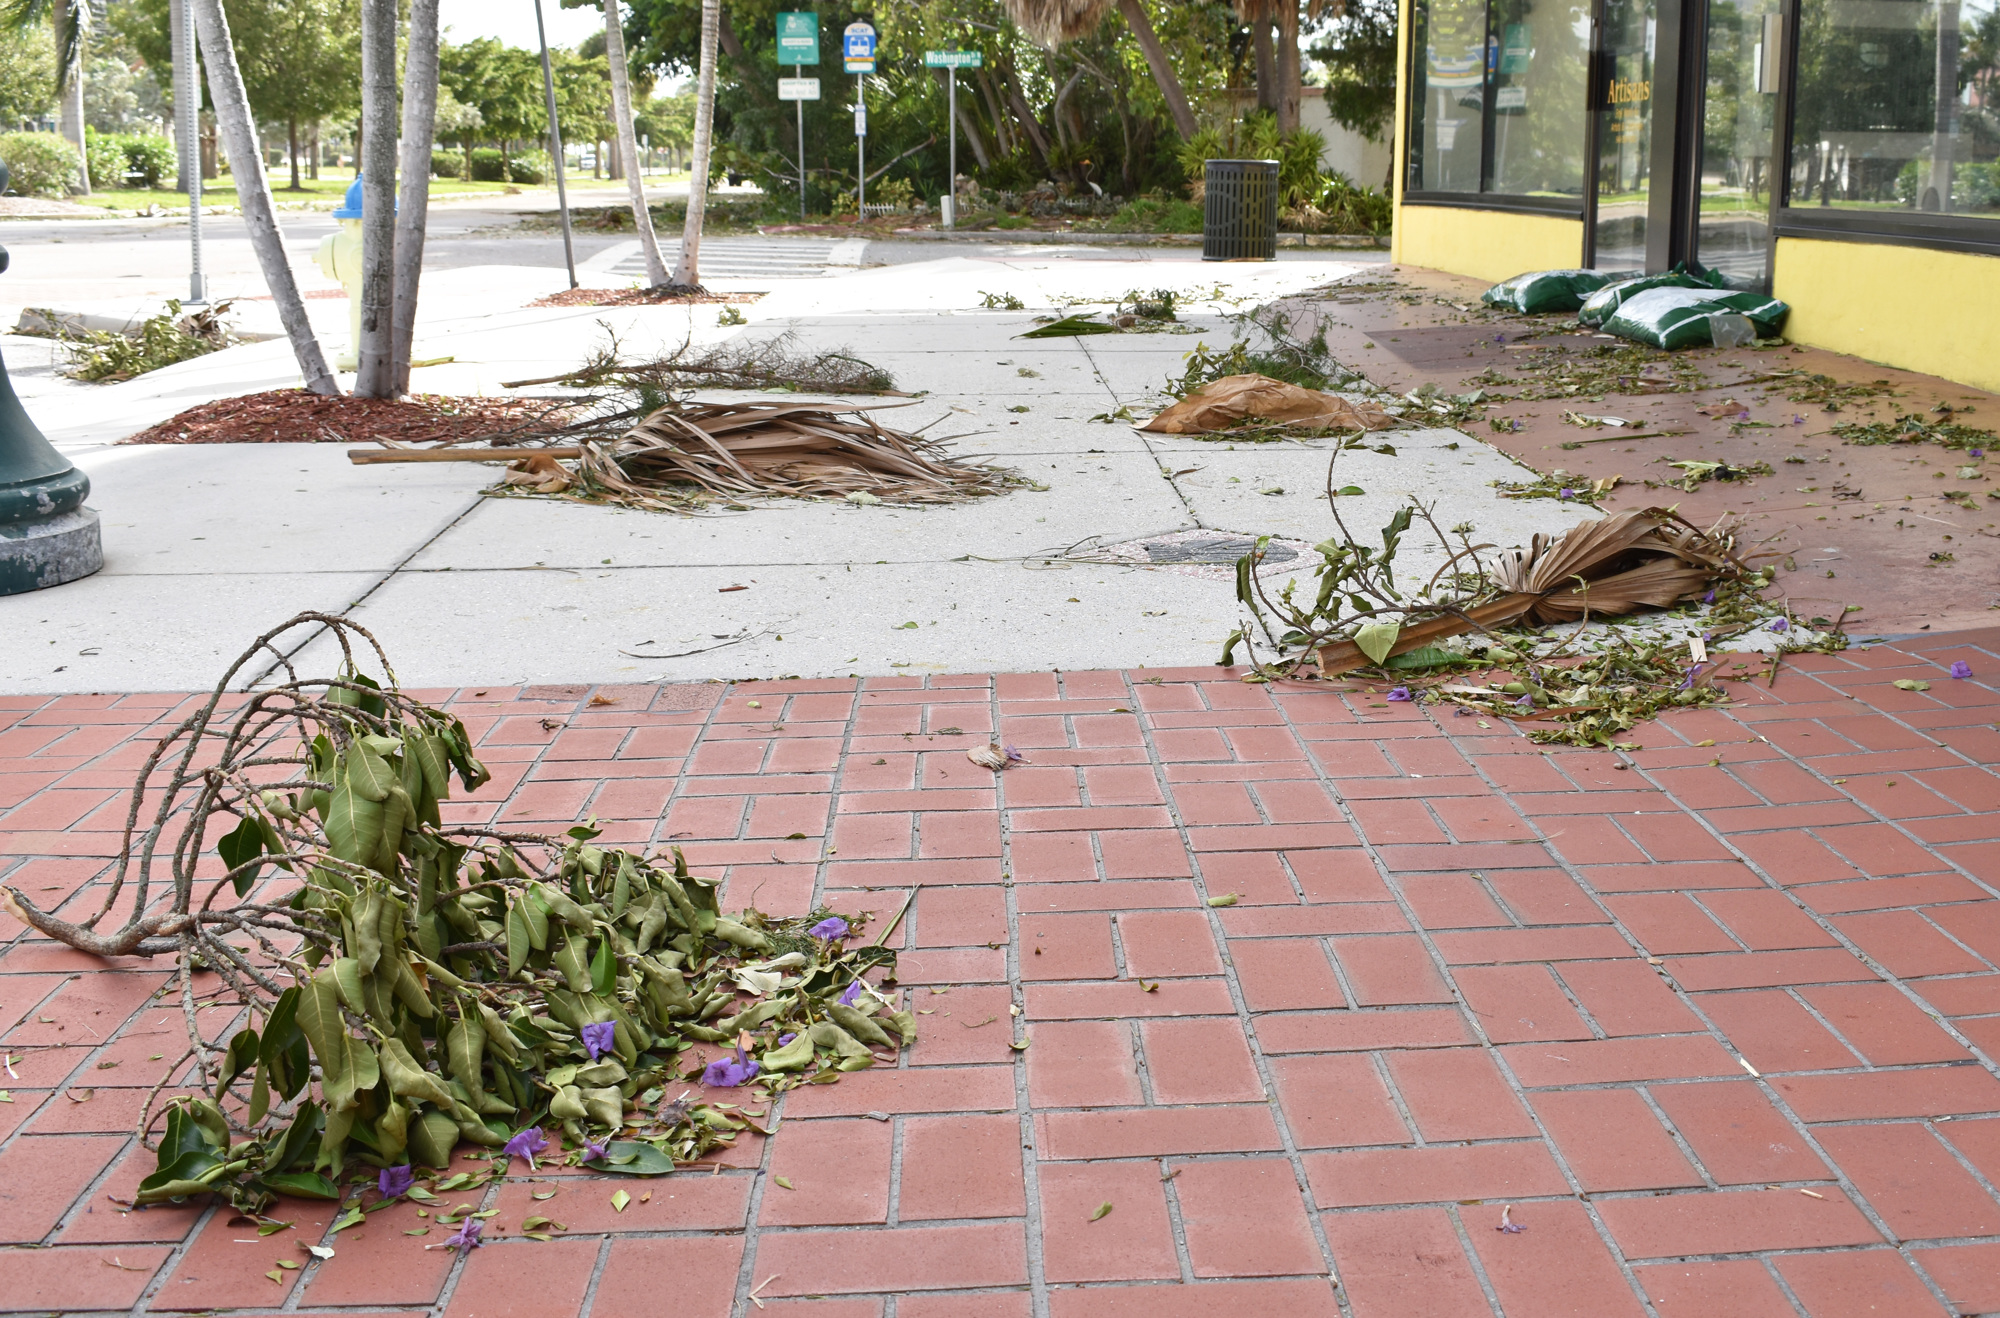 St. Armands Circle was covered in fallen tree debris after Hurricane Irma. Photo by Niki Kottmann